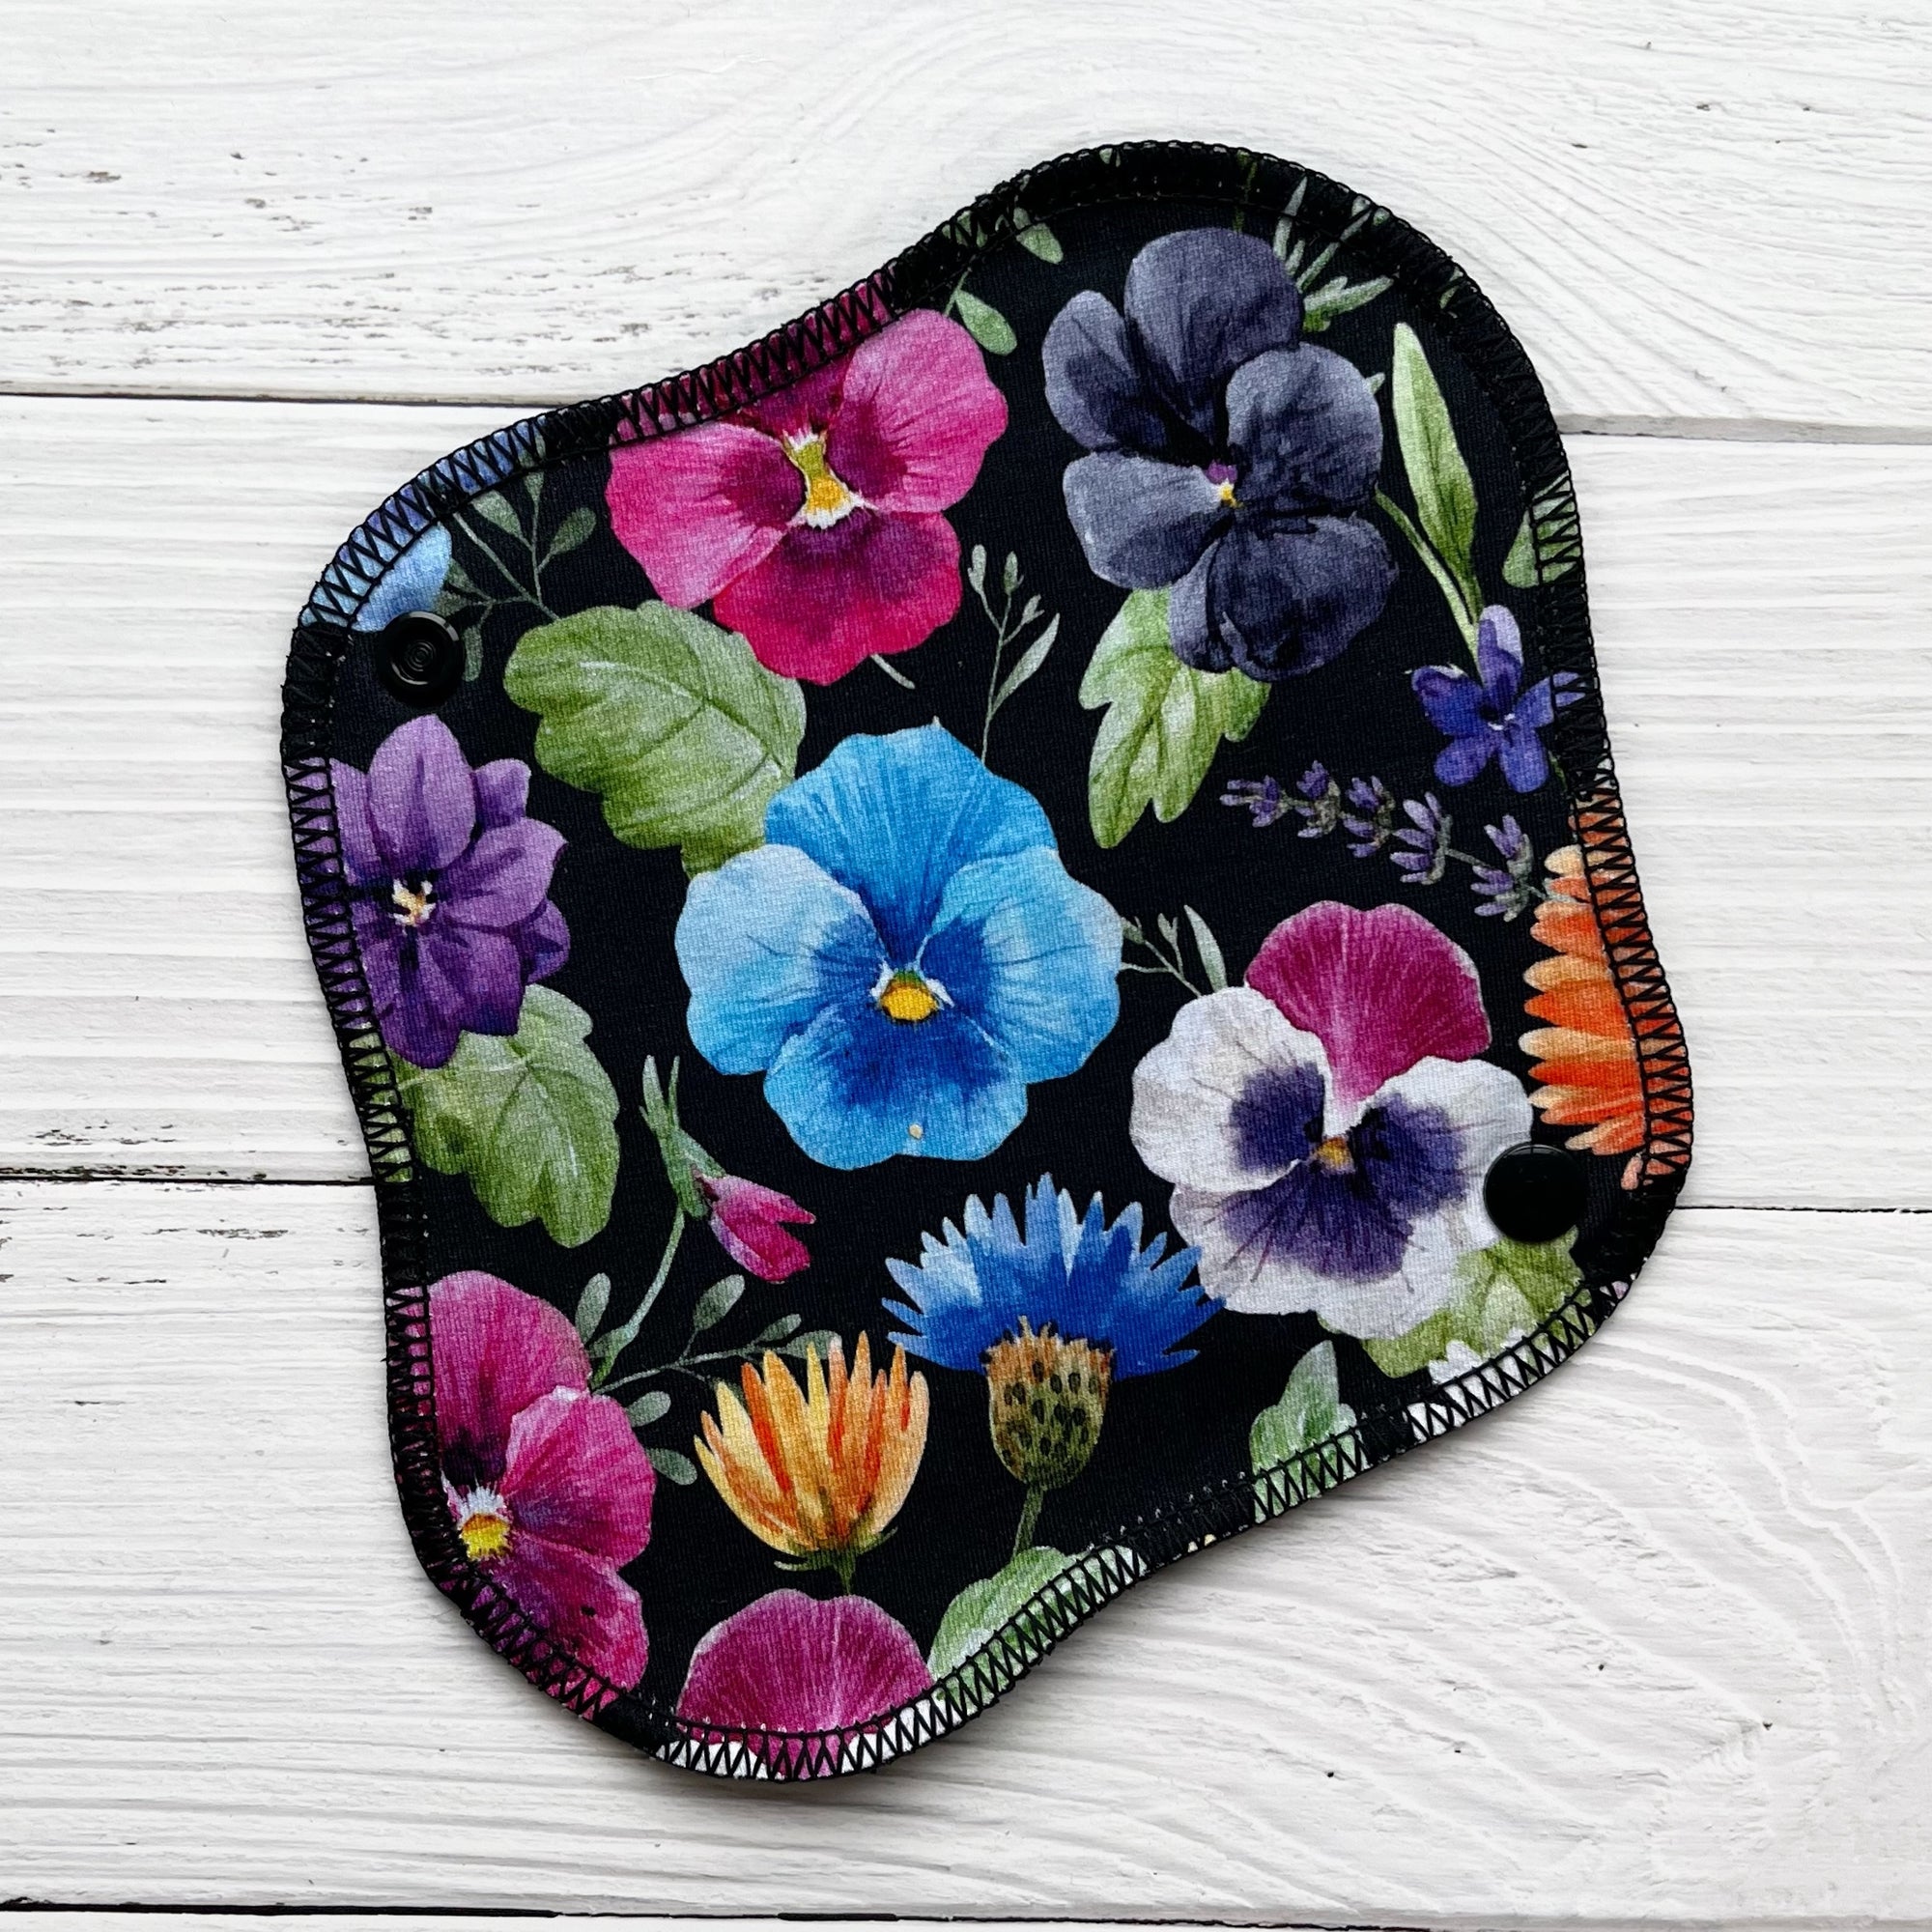 reusable pantyliner in bold pansy print with a black background